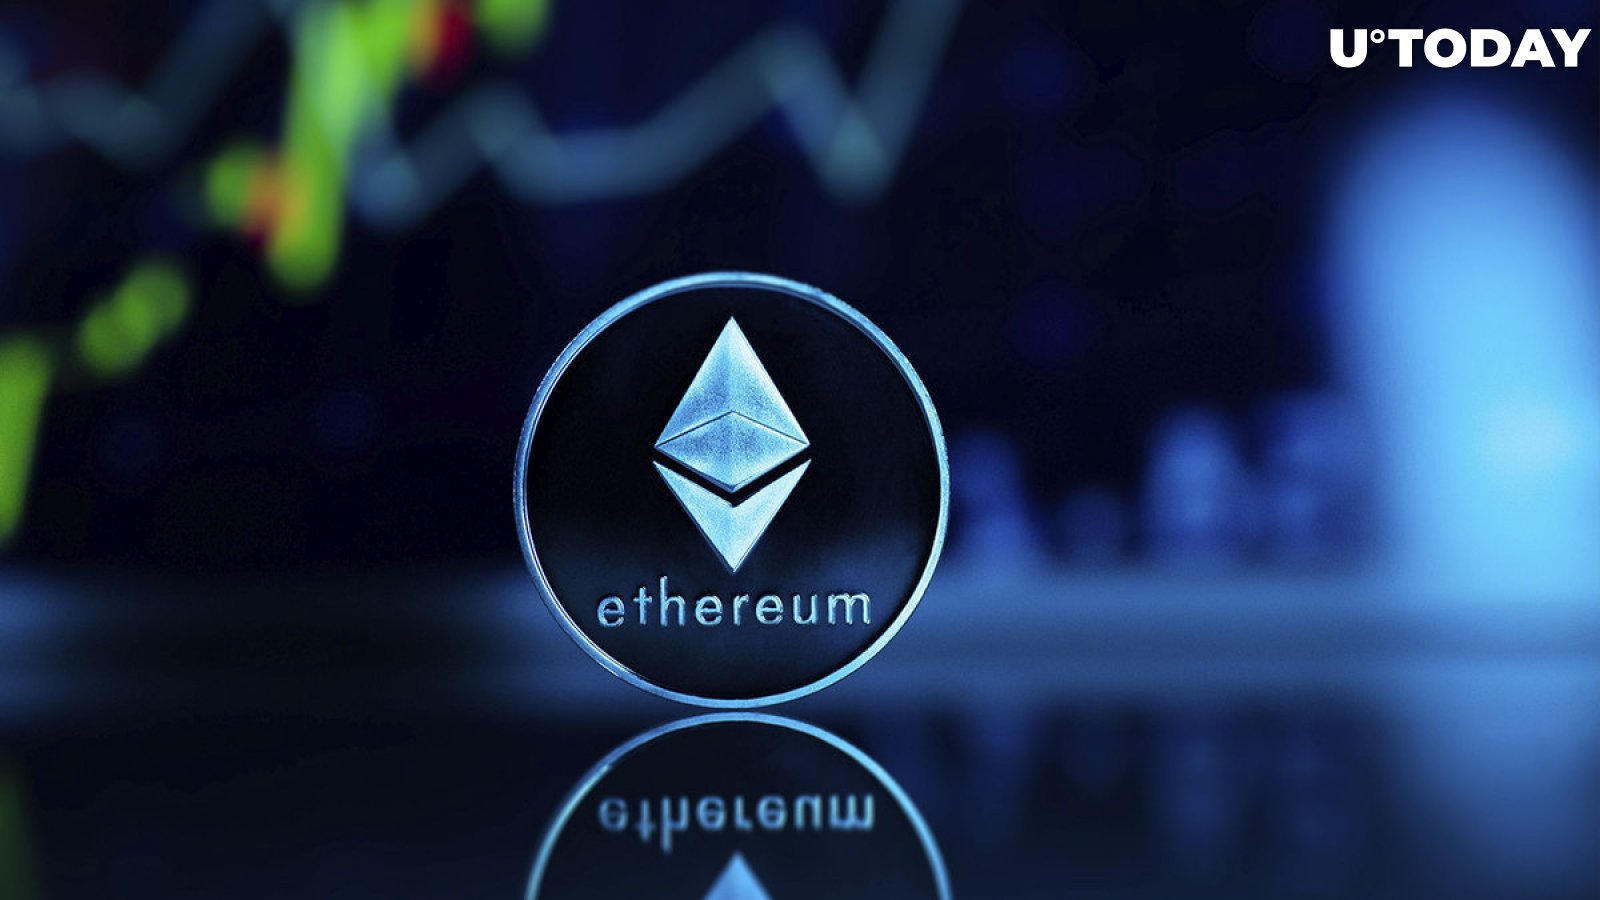 Here's What Pushed Ethereum (ETH) Higher After Market Dip: Details